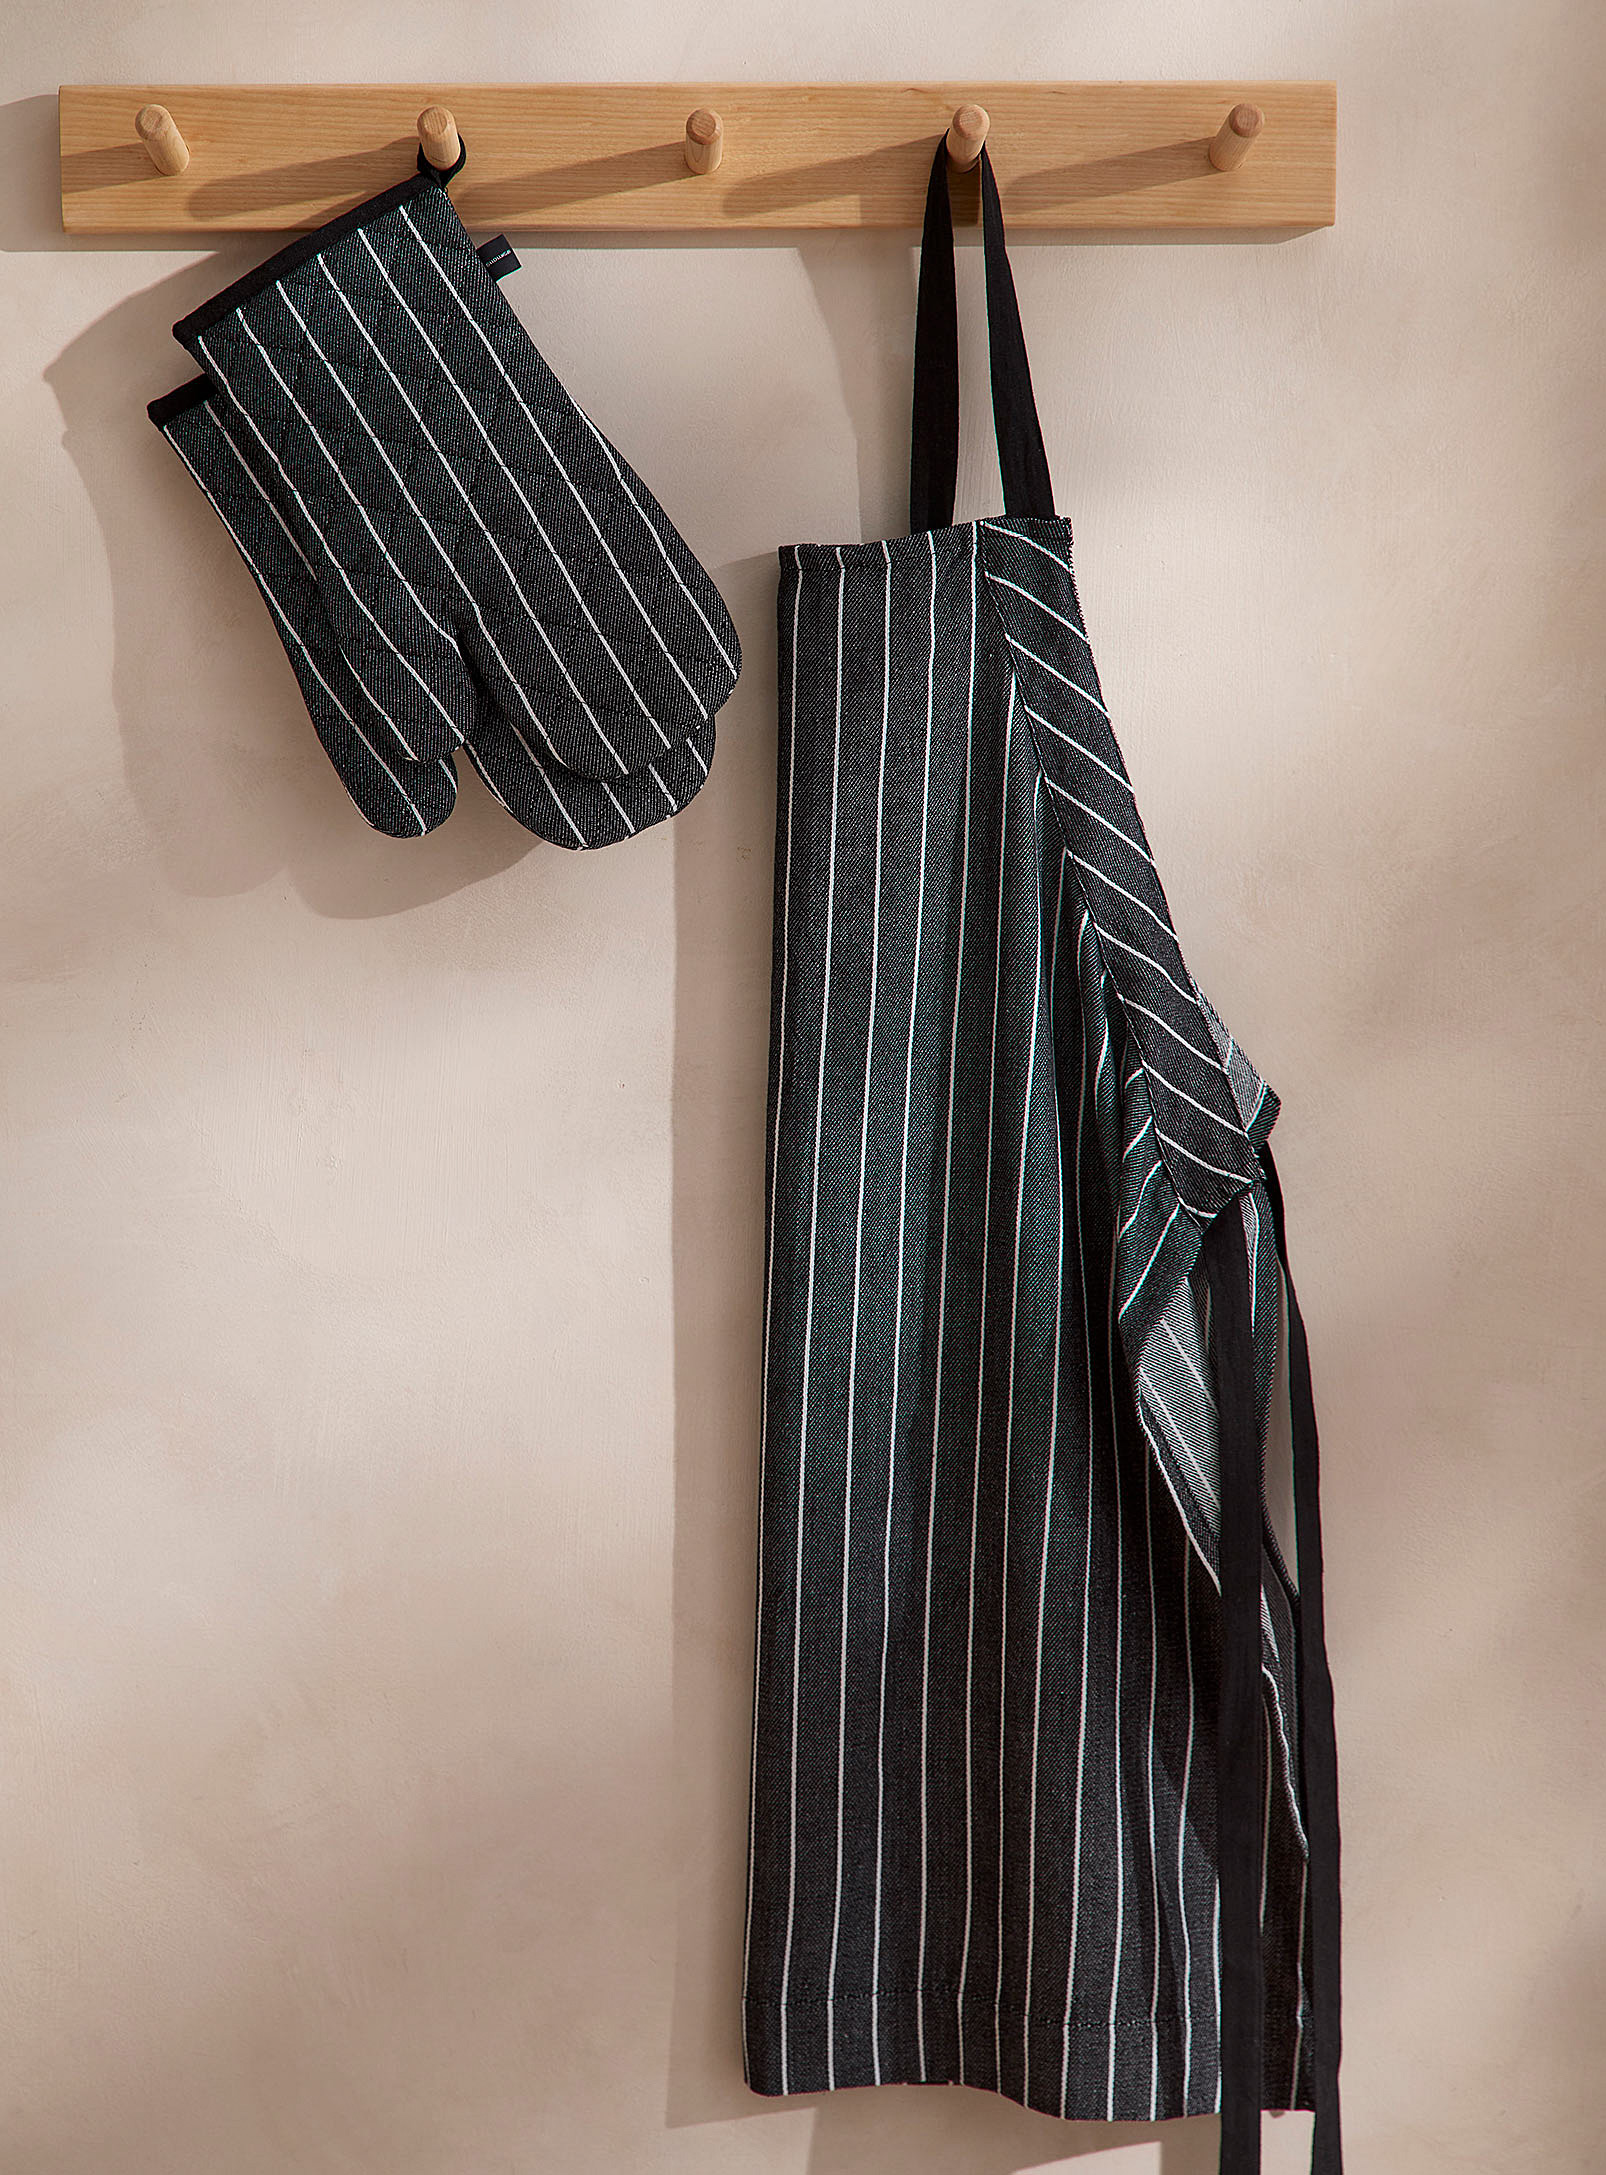 Simons Maison Pinstriped Organic Cotton Accessories In Black And White